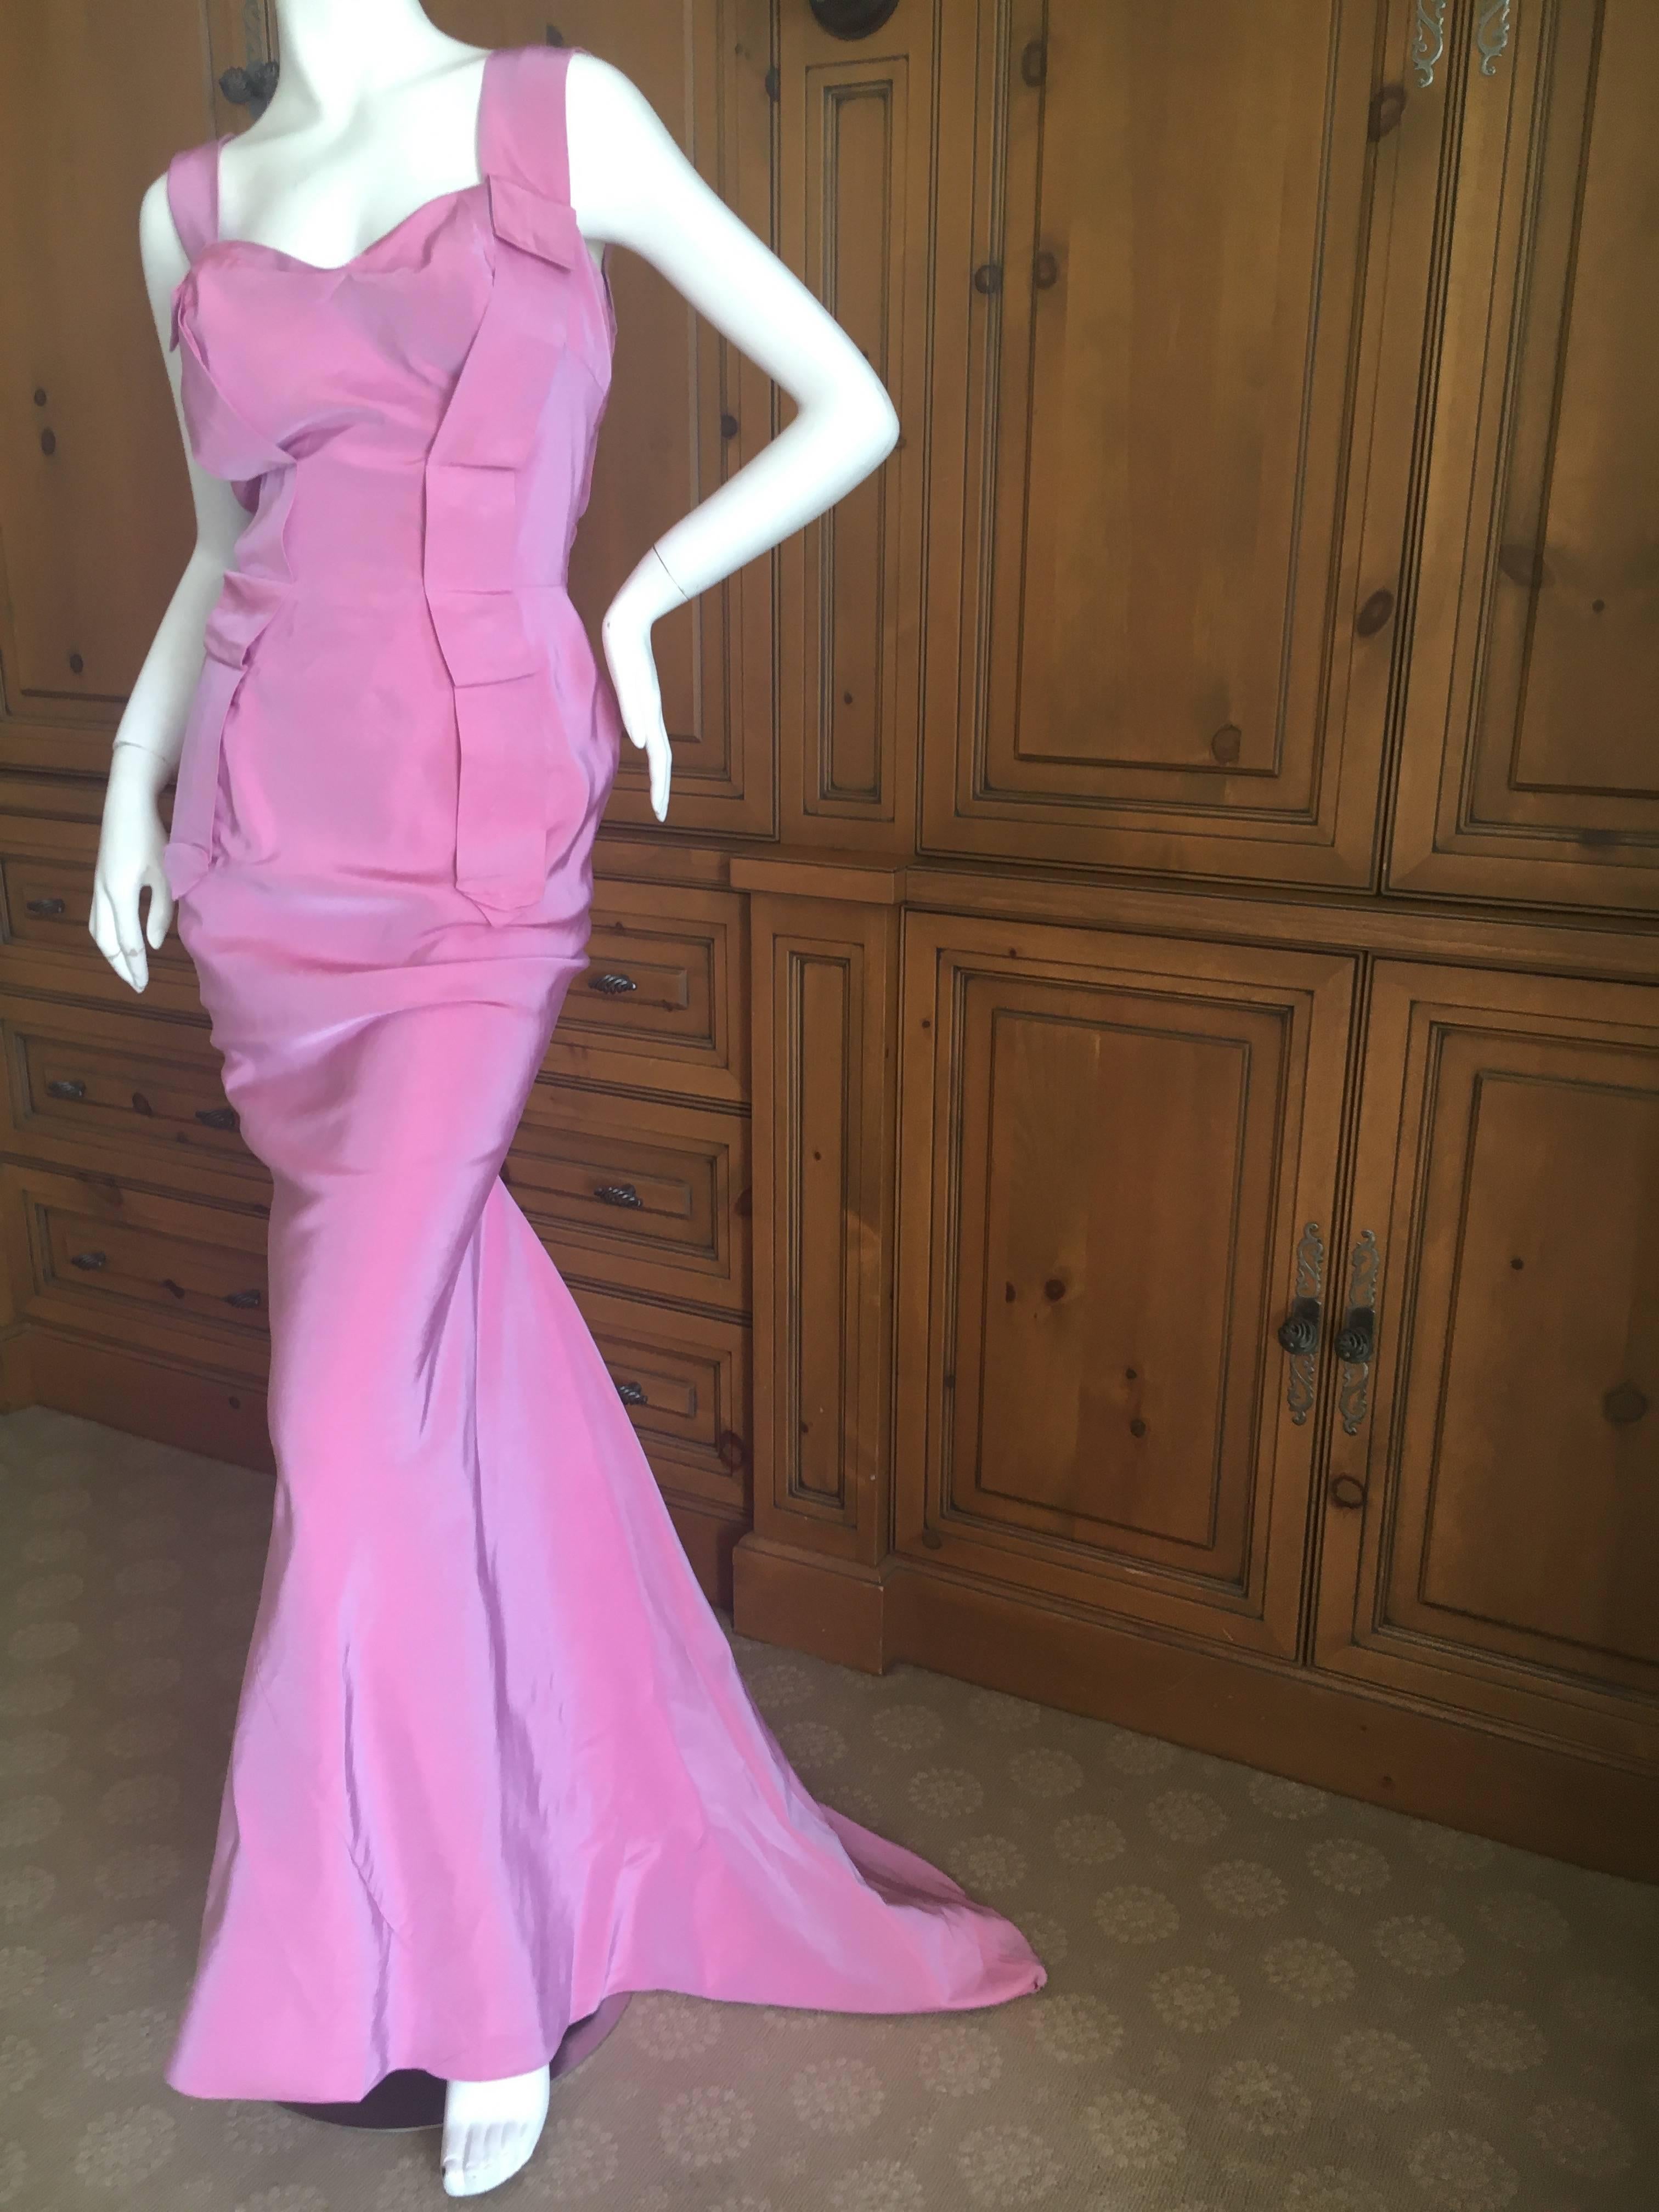 Vivienne Westwood Gold Label Rose Pink Evening Dress with Fishtail Train, 2011  For Sale 3